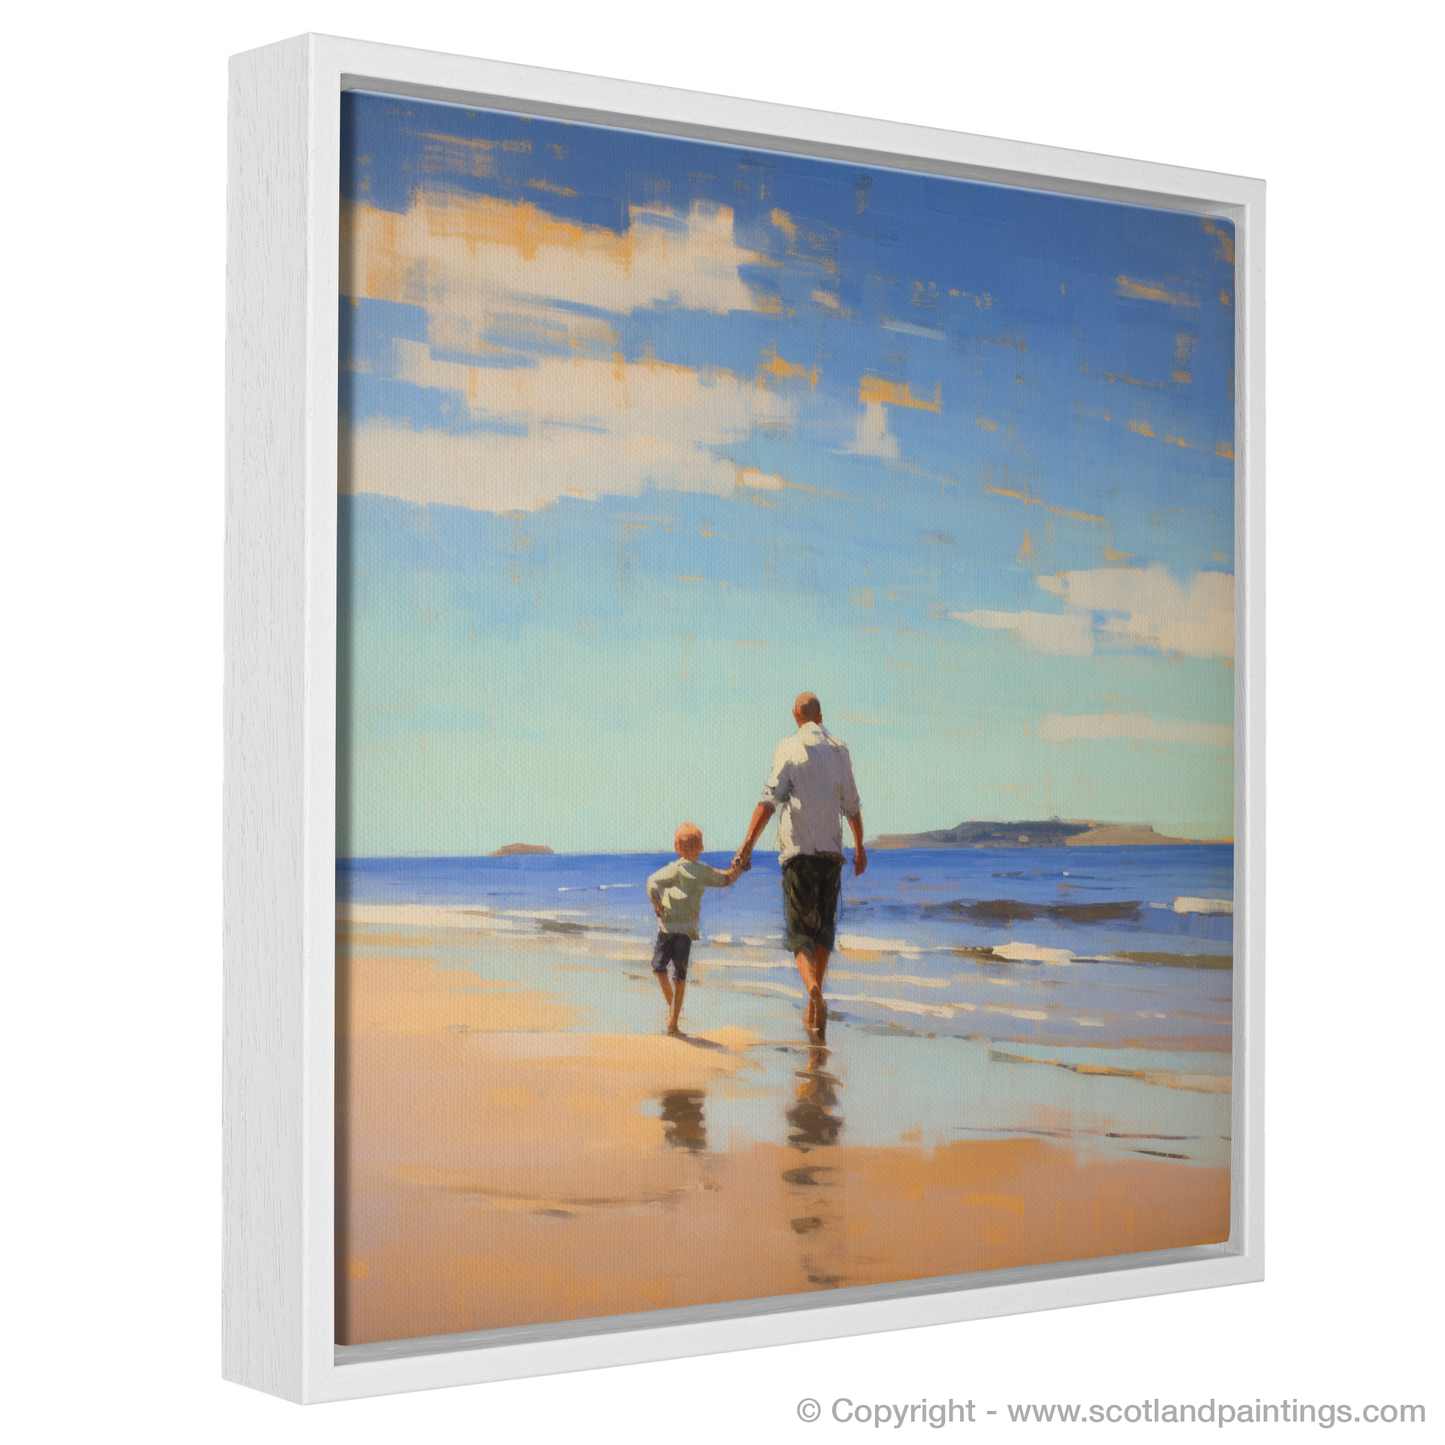 Painting and Art Print of A dad and son walking on Coldingham Bay entitled "Strolling on Coldingham Sands: An Impressionist Tribute to Fatherhood".